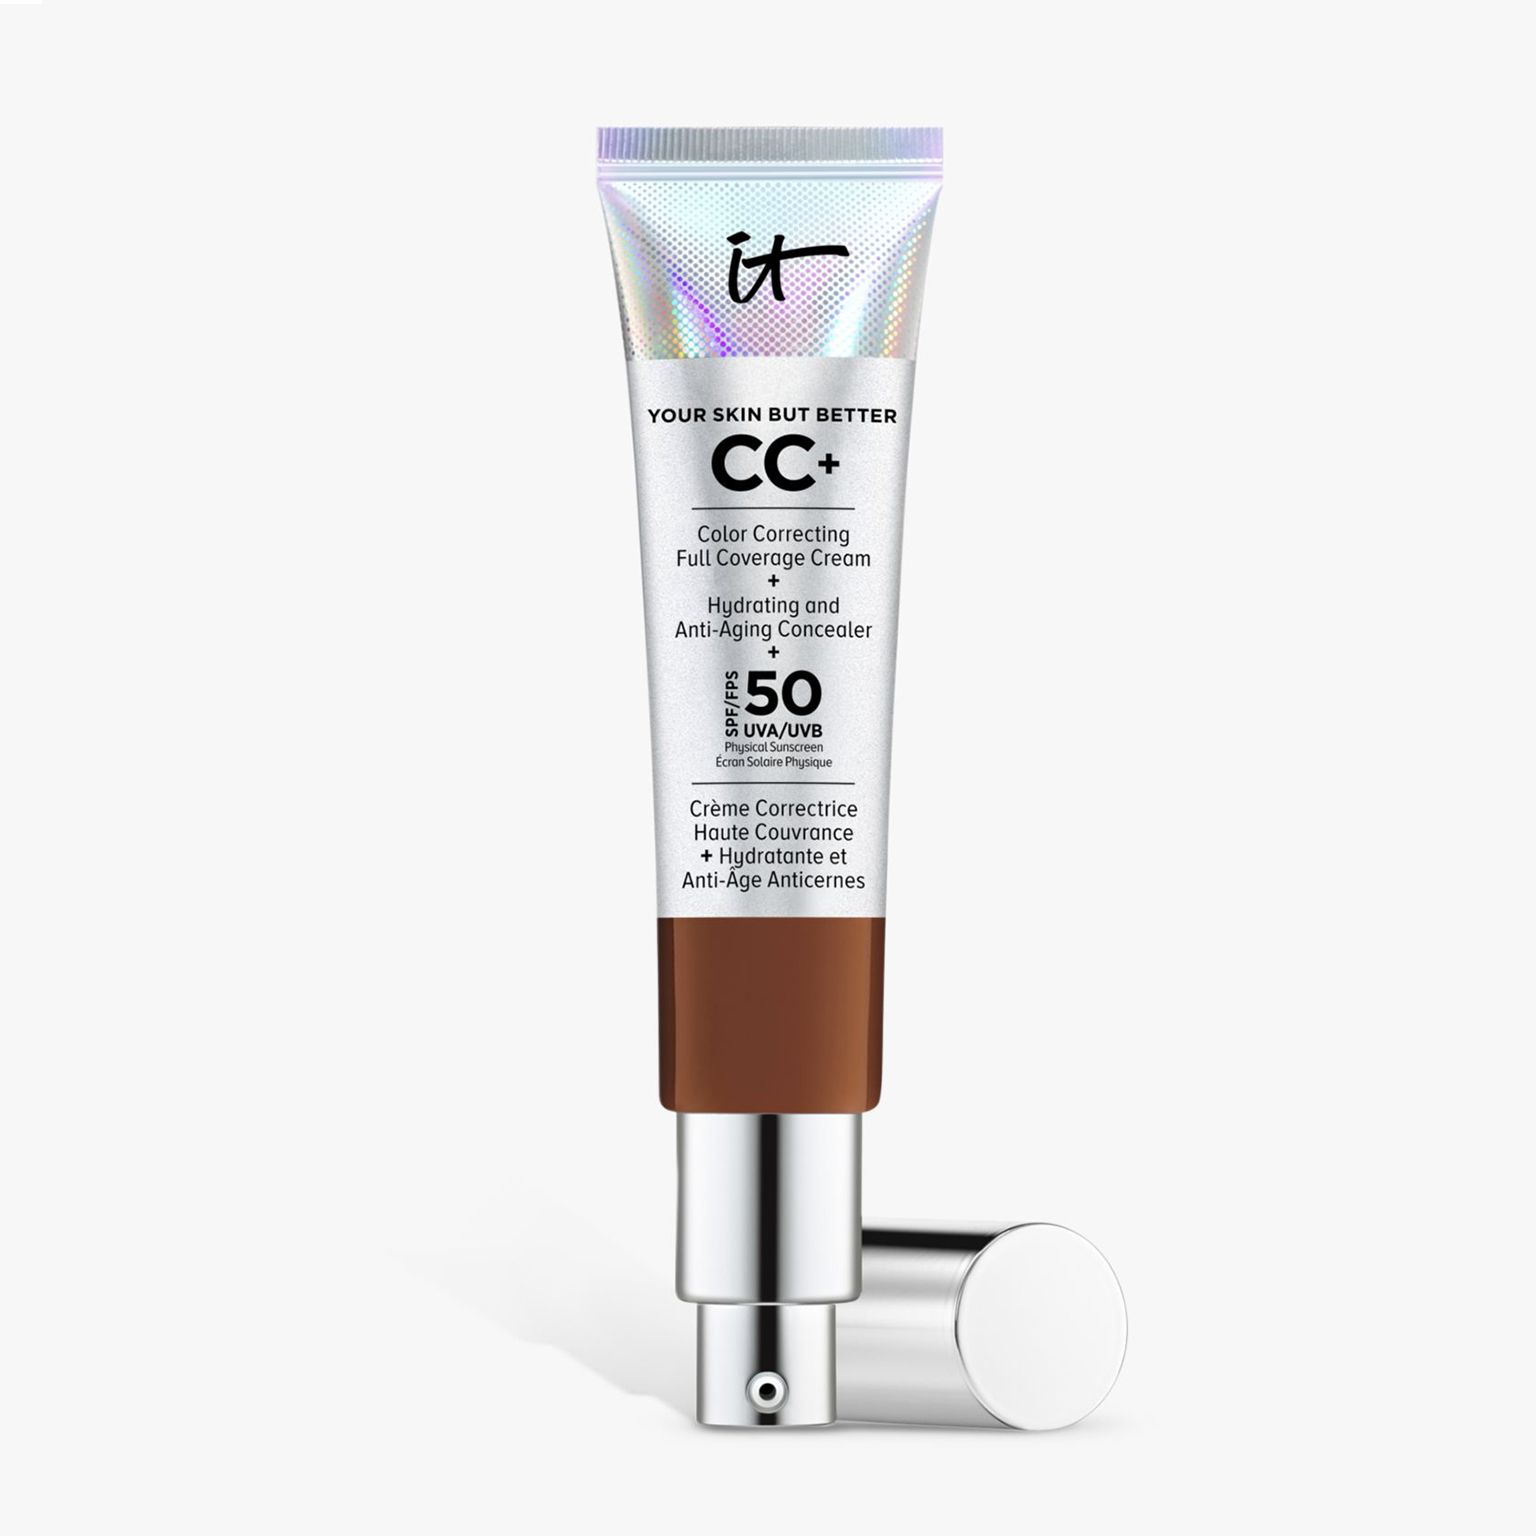  IT Cosmetics Your Skin But Better CC+ Cream with SPF 50